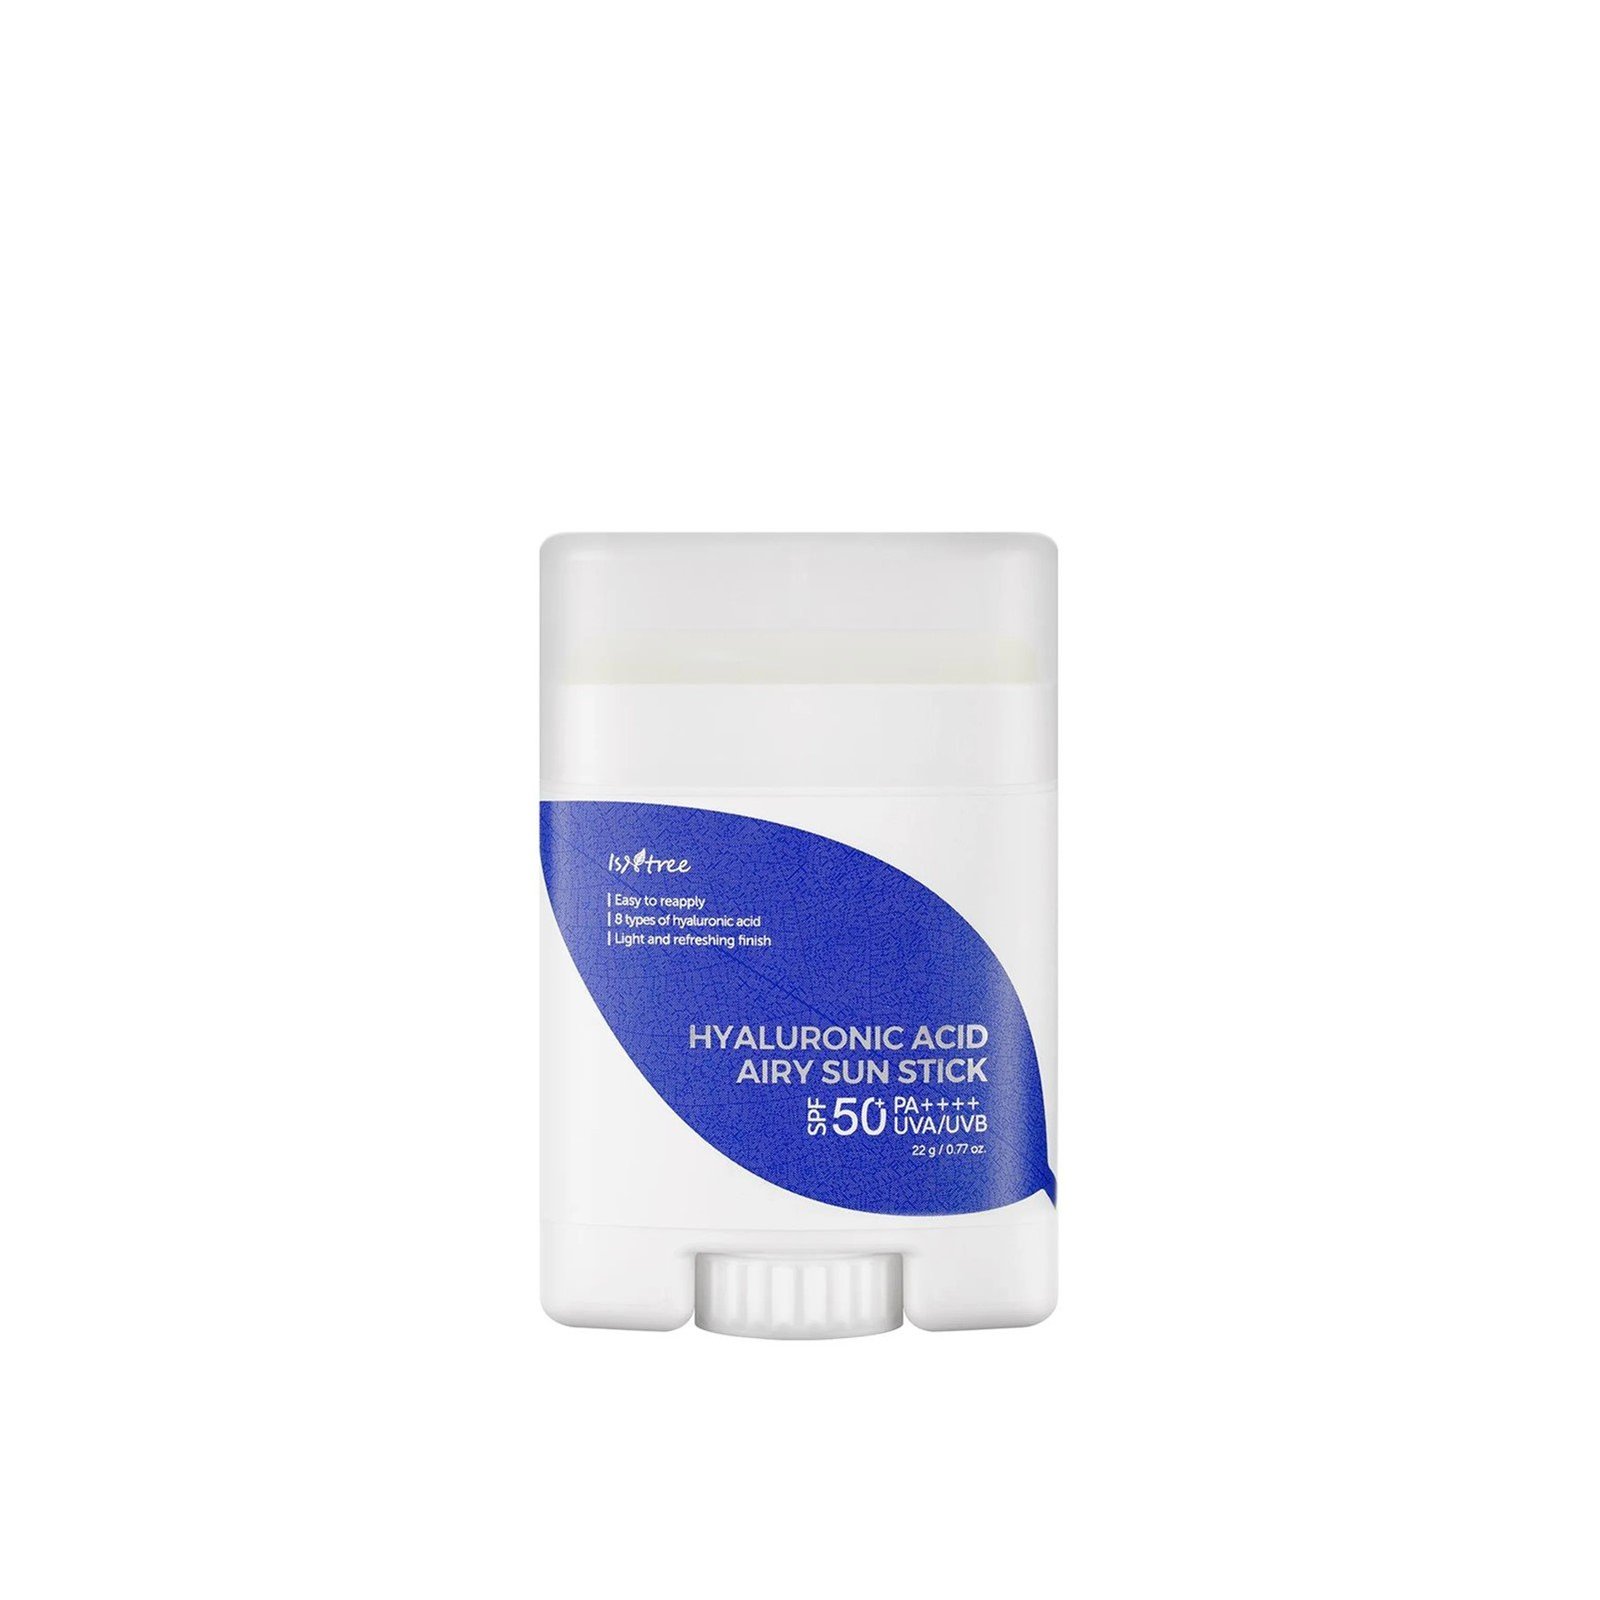 Isntree Hyaluronic Acid Airy Sun Stick SPF50+ 22g